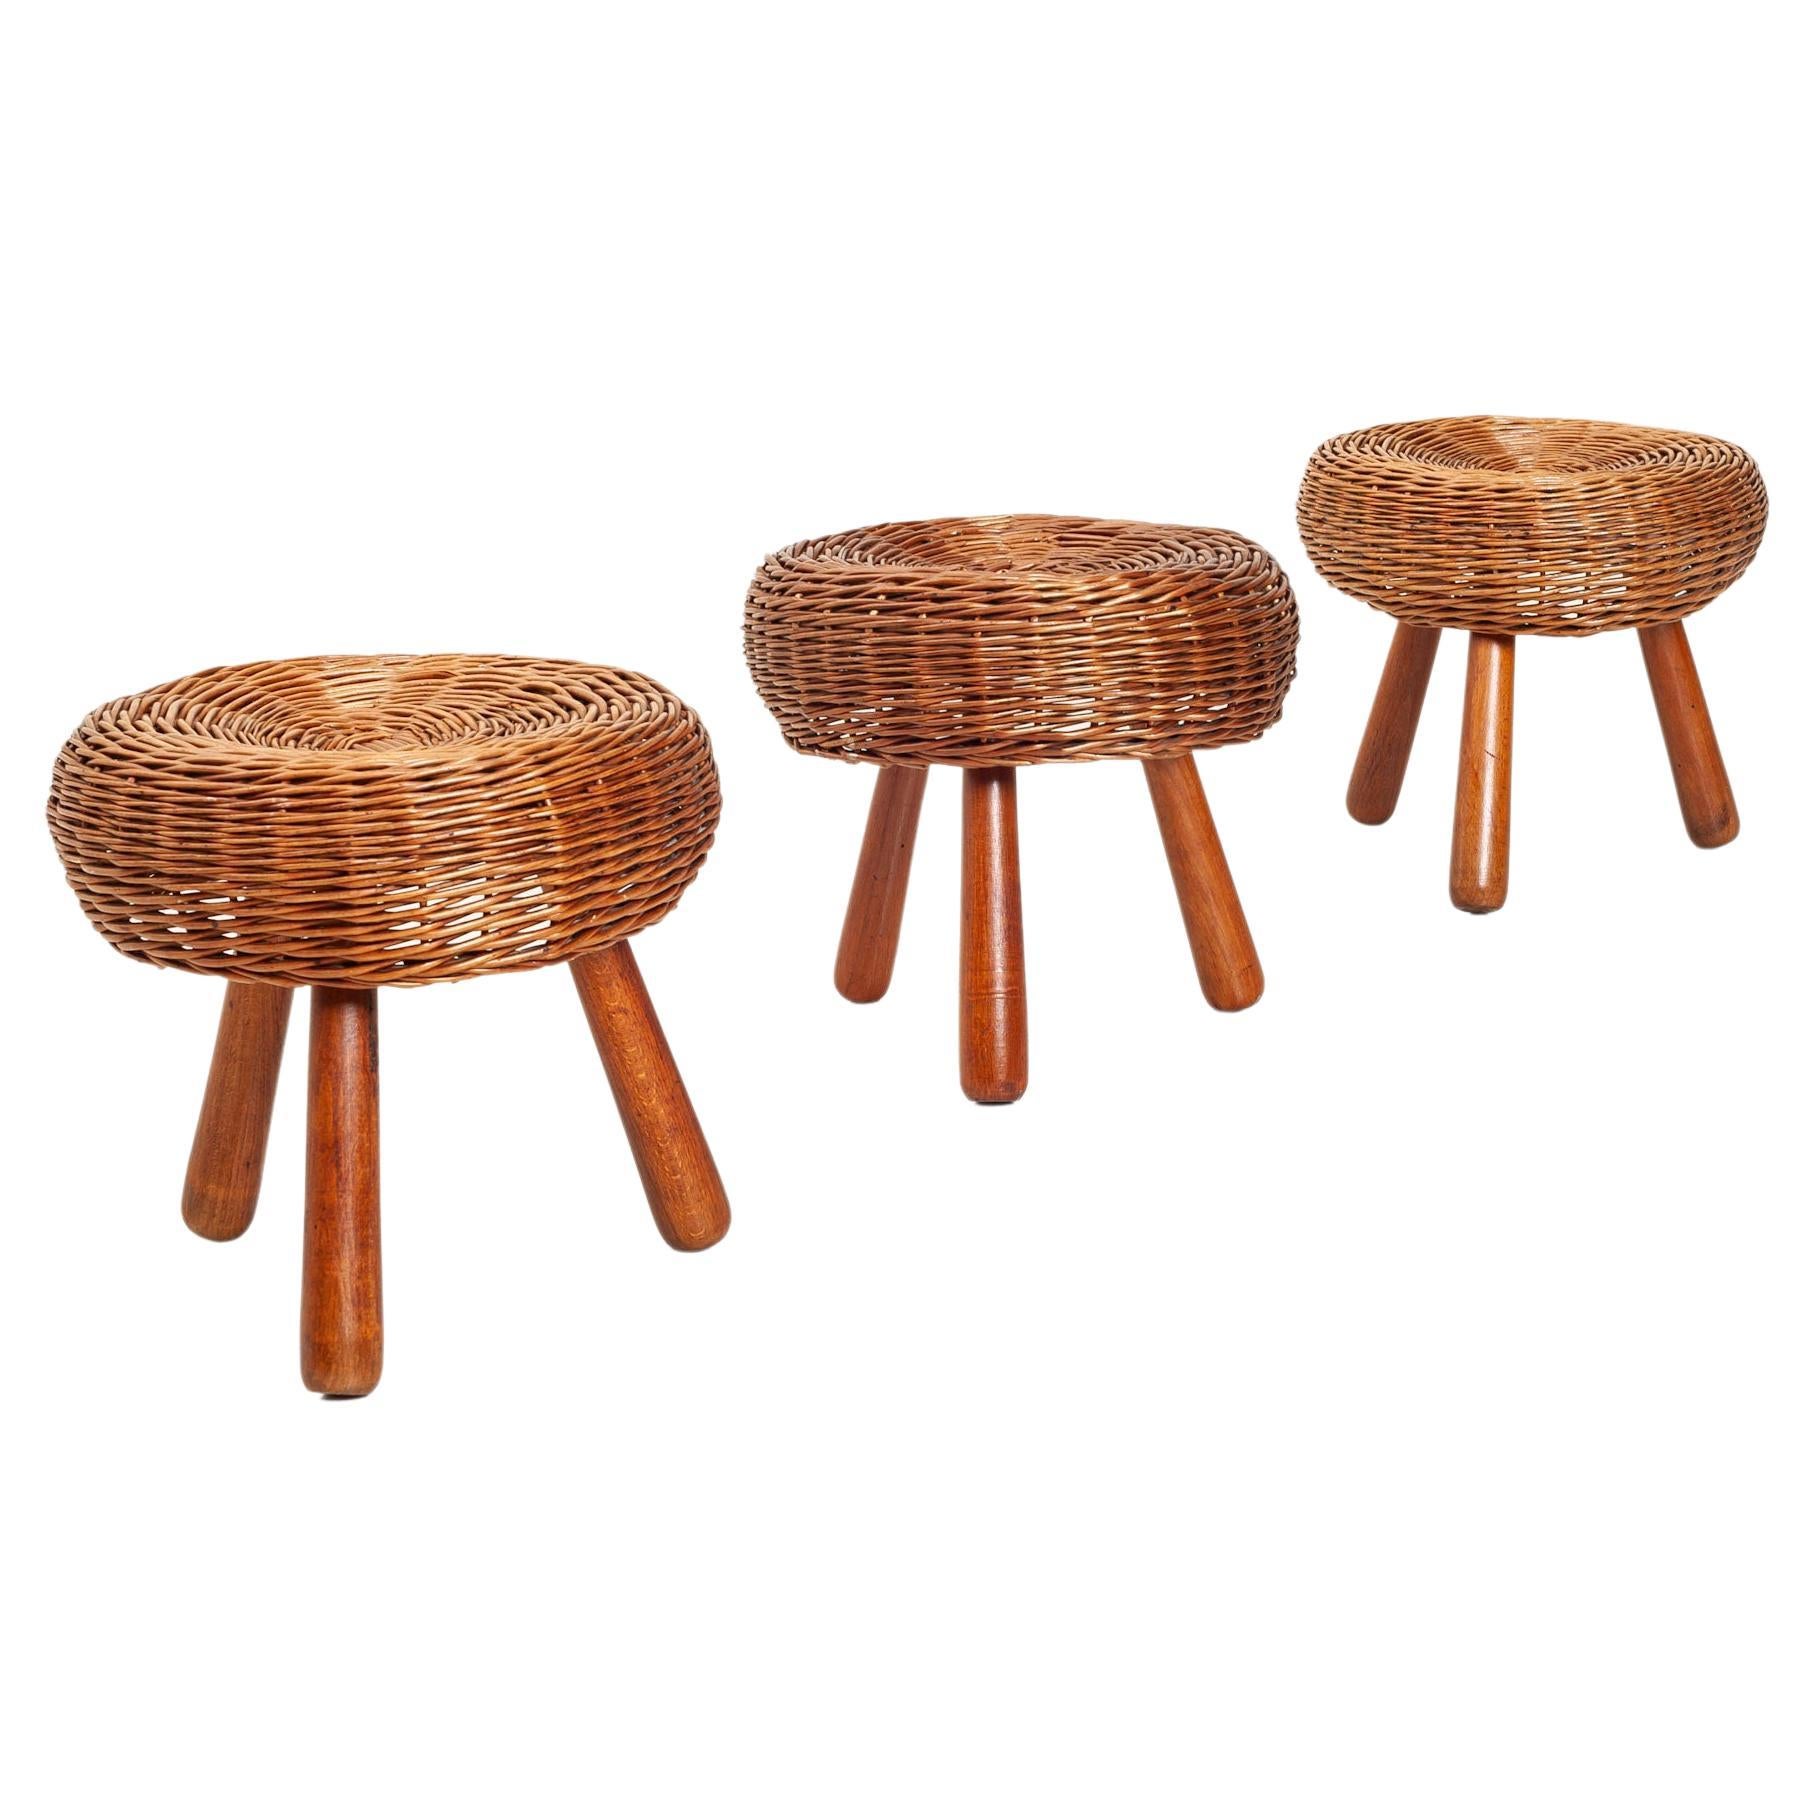 Tony Paul Attributed Low Stools, Woven Wicker, Solid Beech, United States, 1950s For Sale